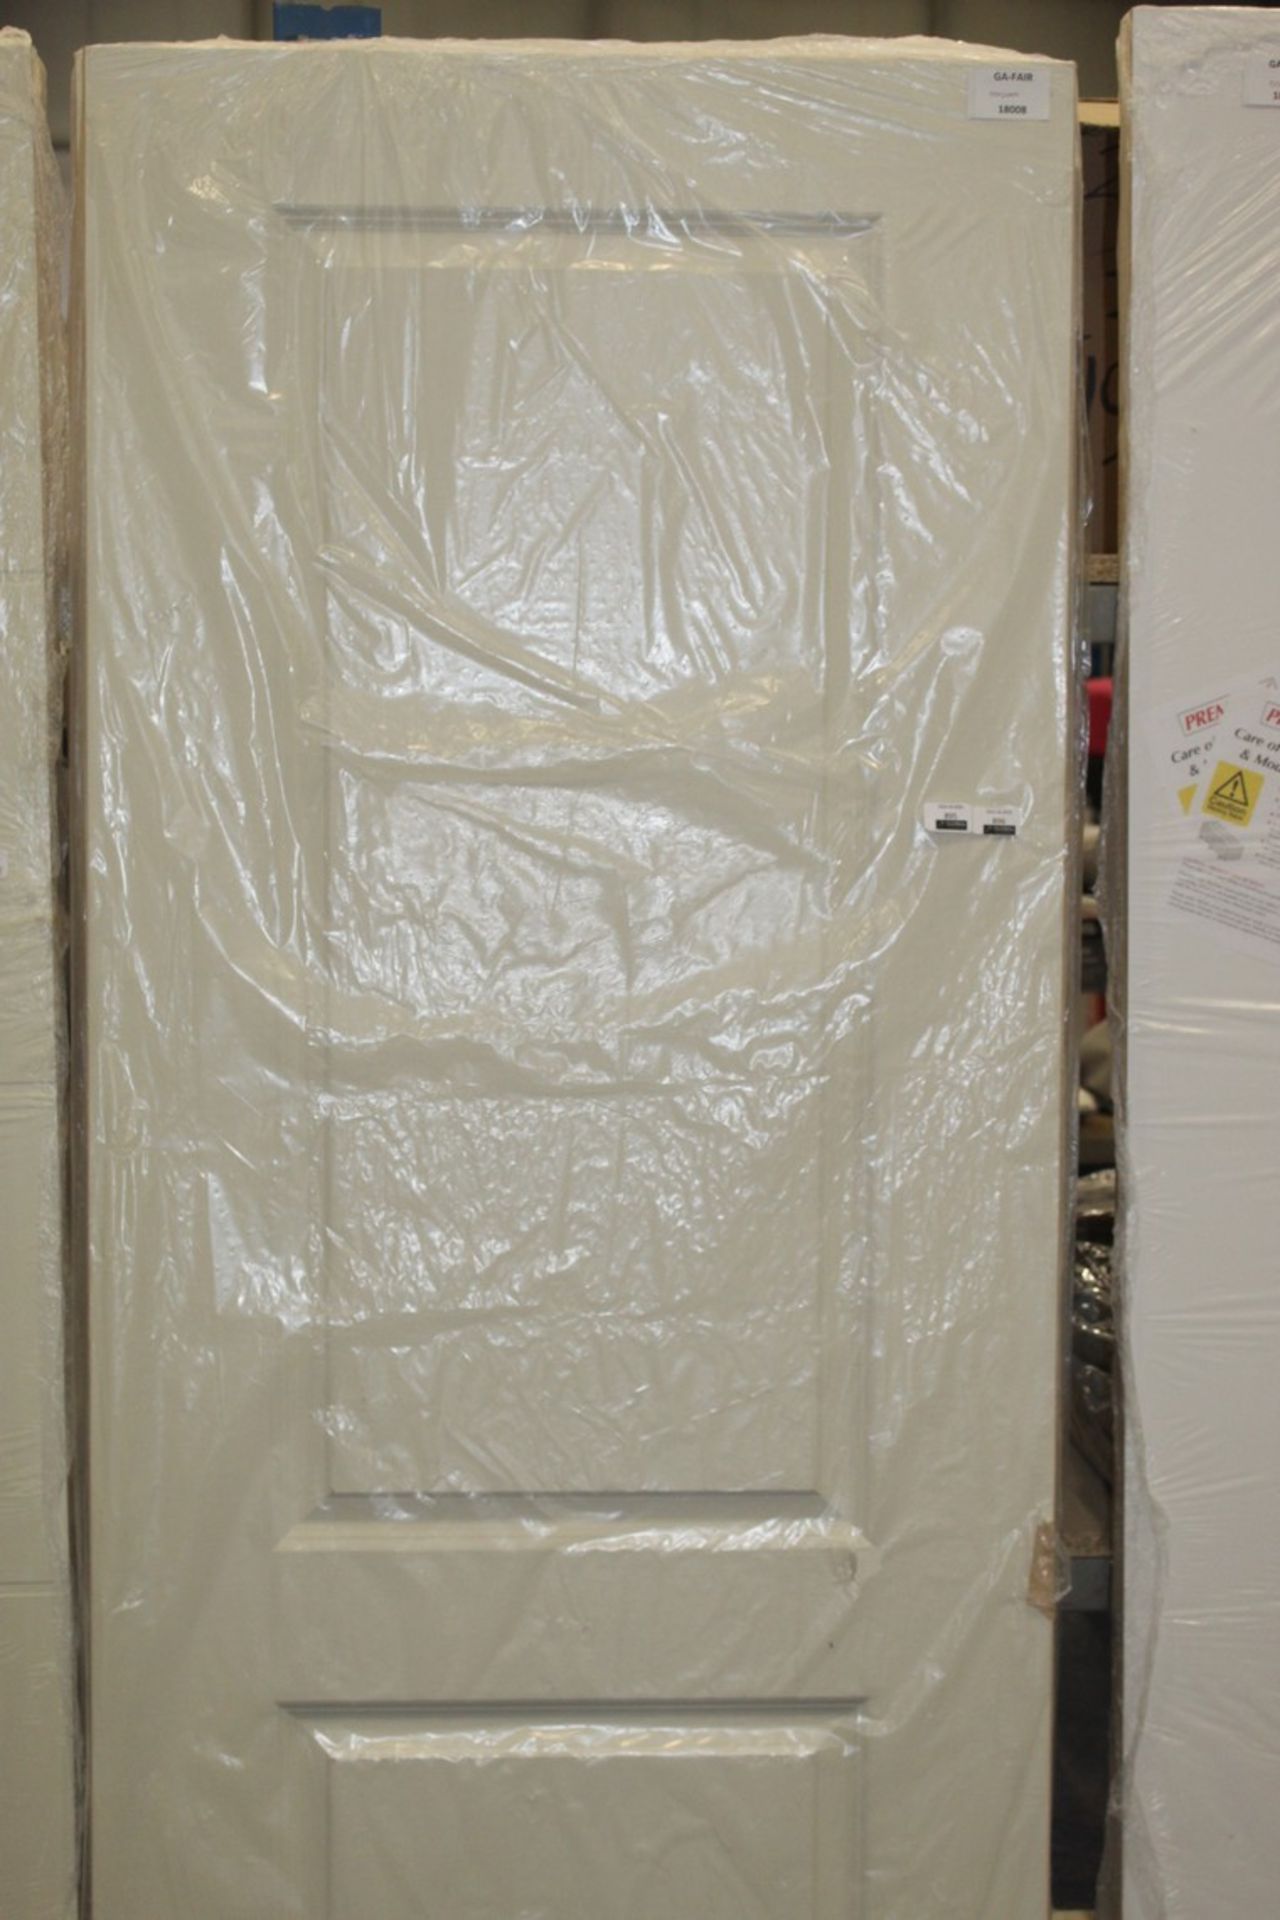 White 200 x 77cm Fire Door RRP £150 (Appraisals Are Available Upon Request)(Pictures Are For